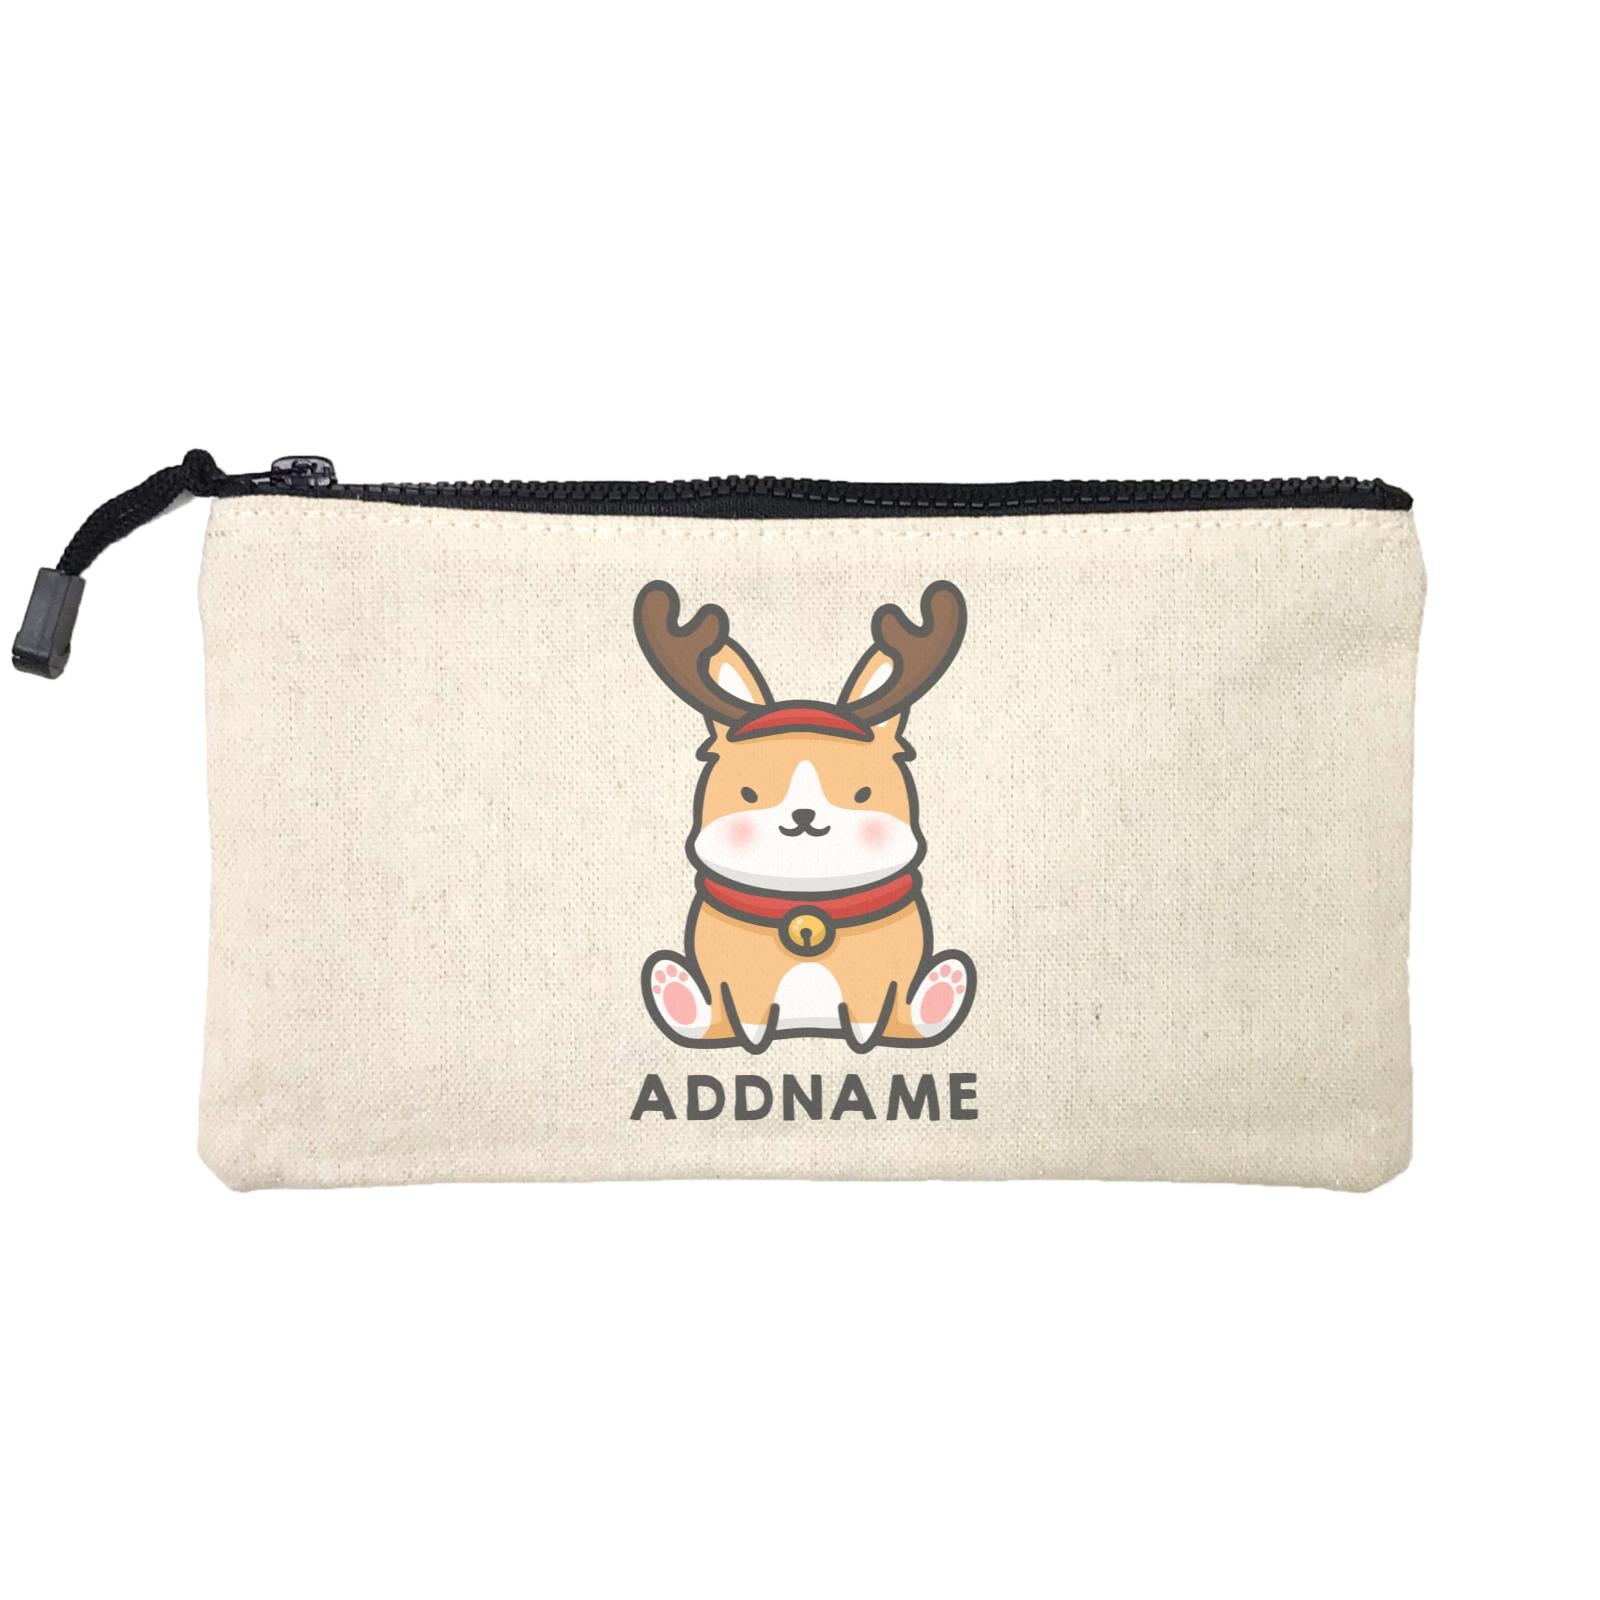 Xmas Cute Dog With Reindeer Antlers Addname Mini Accessories Stationery Pouch